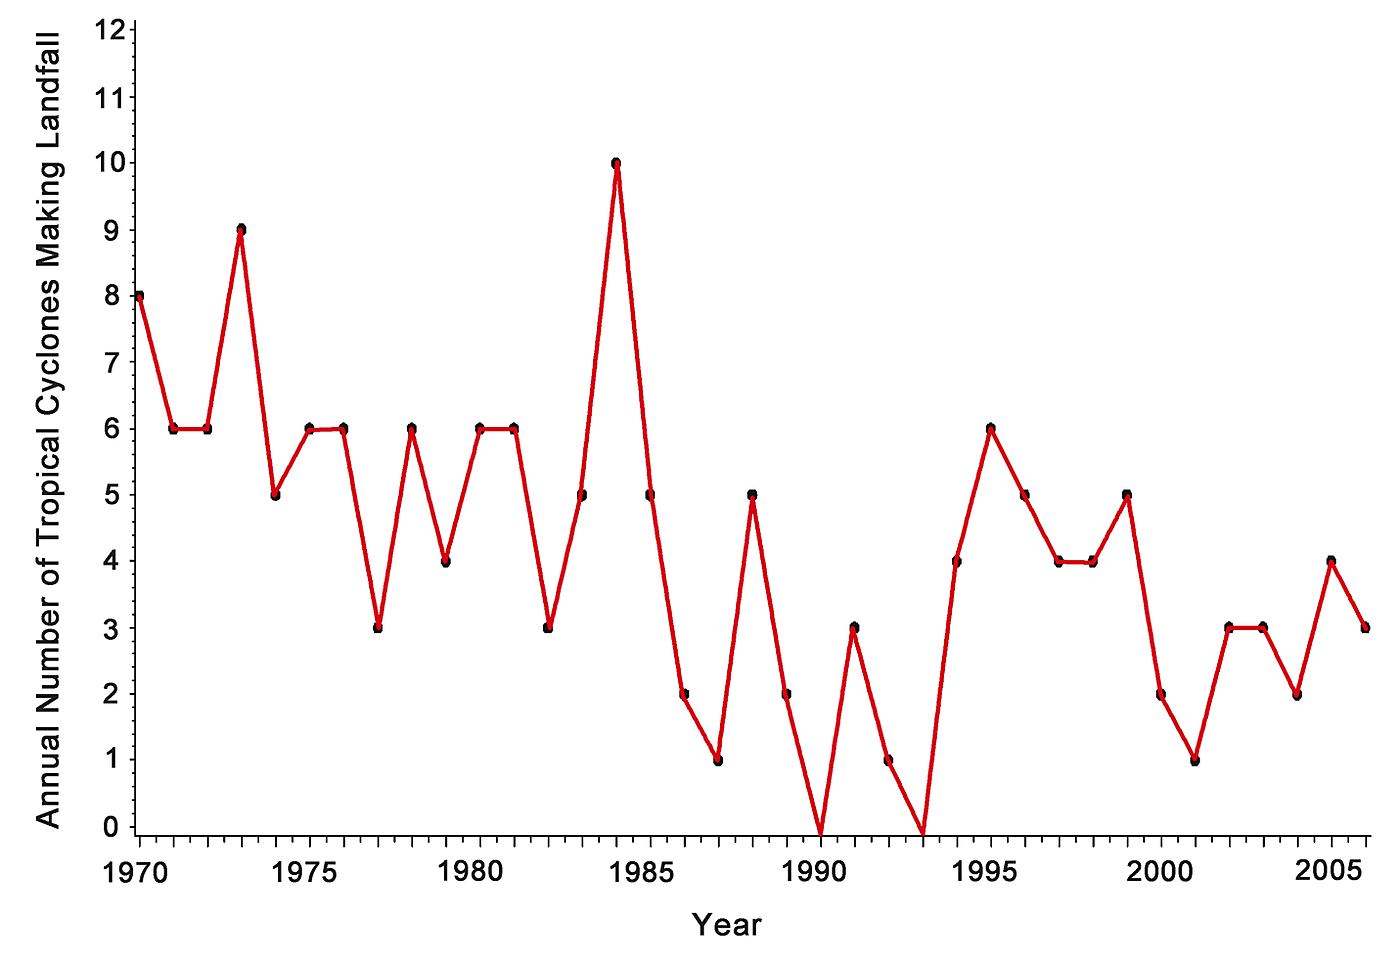 Figure 1. Annual frequency of tropical cyclones, or hurricanes, making landfall in Australia over the period 1970-2006.  Adapted from Seo, 2014.